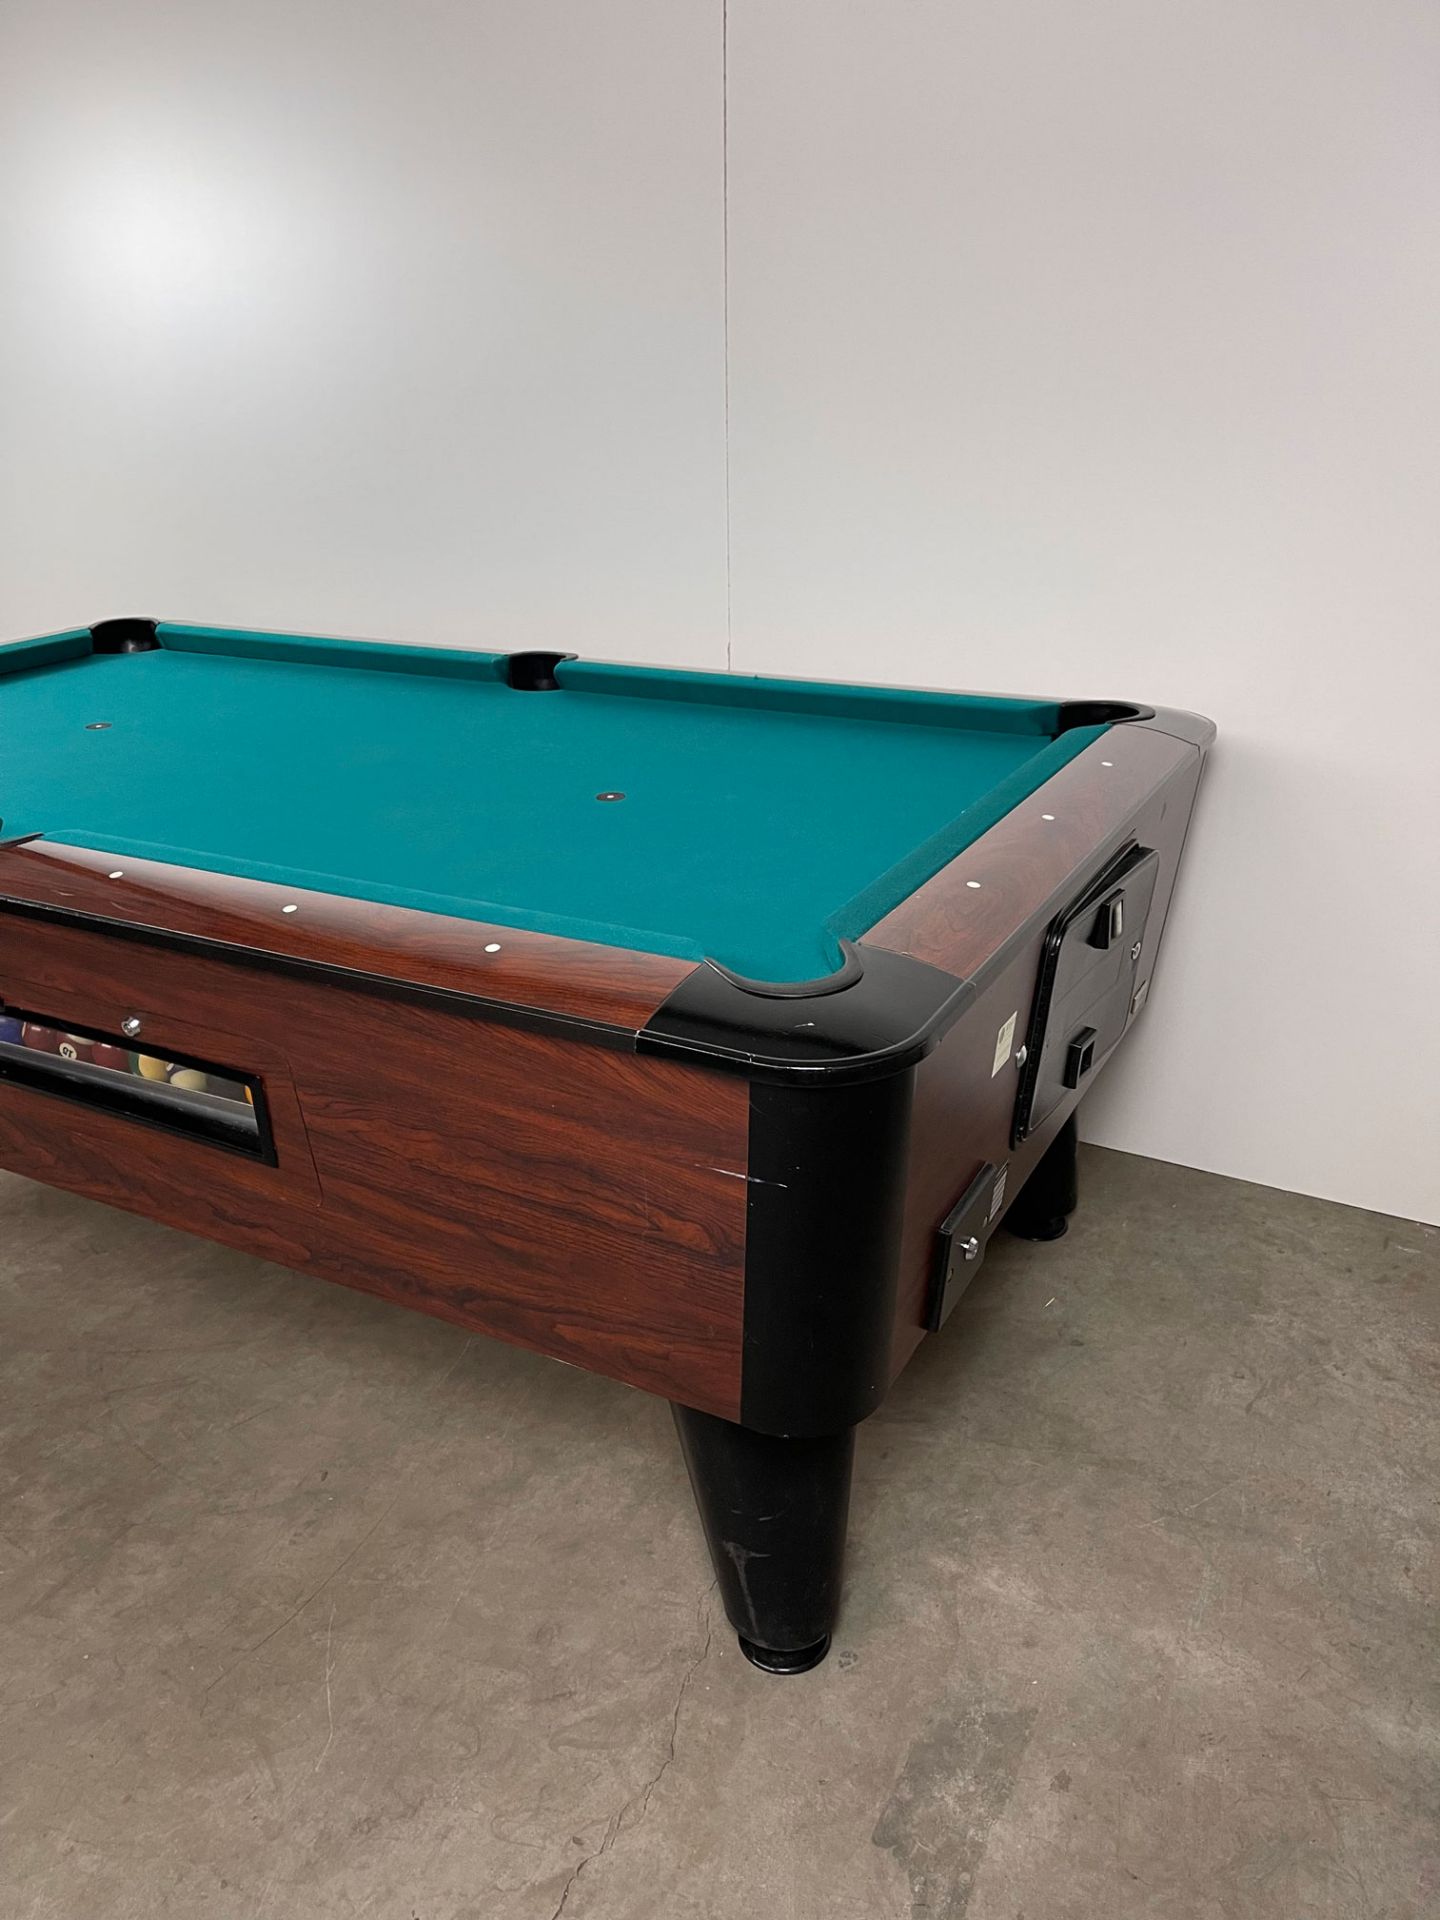 7ft SAM YOWA Coin-Op Billiards Table - Image 5 of 16